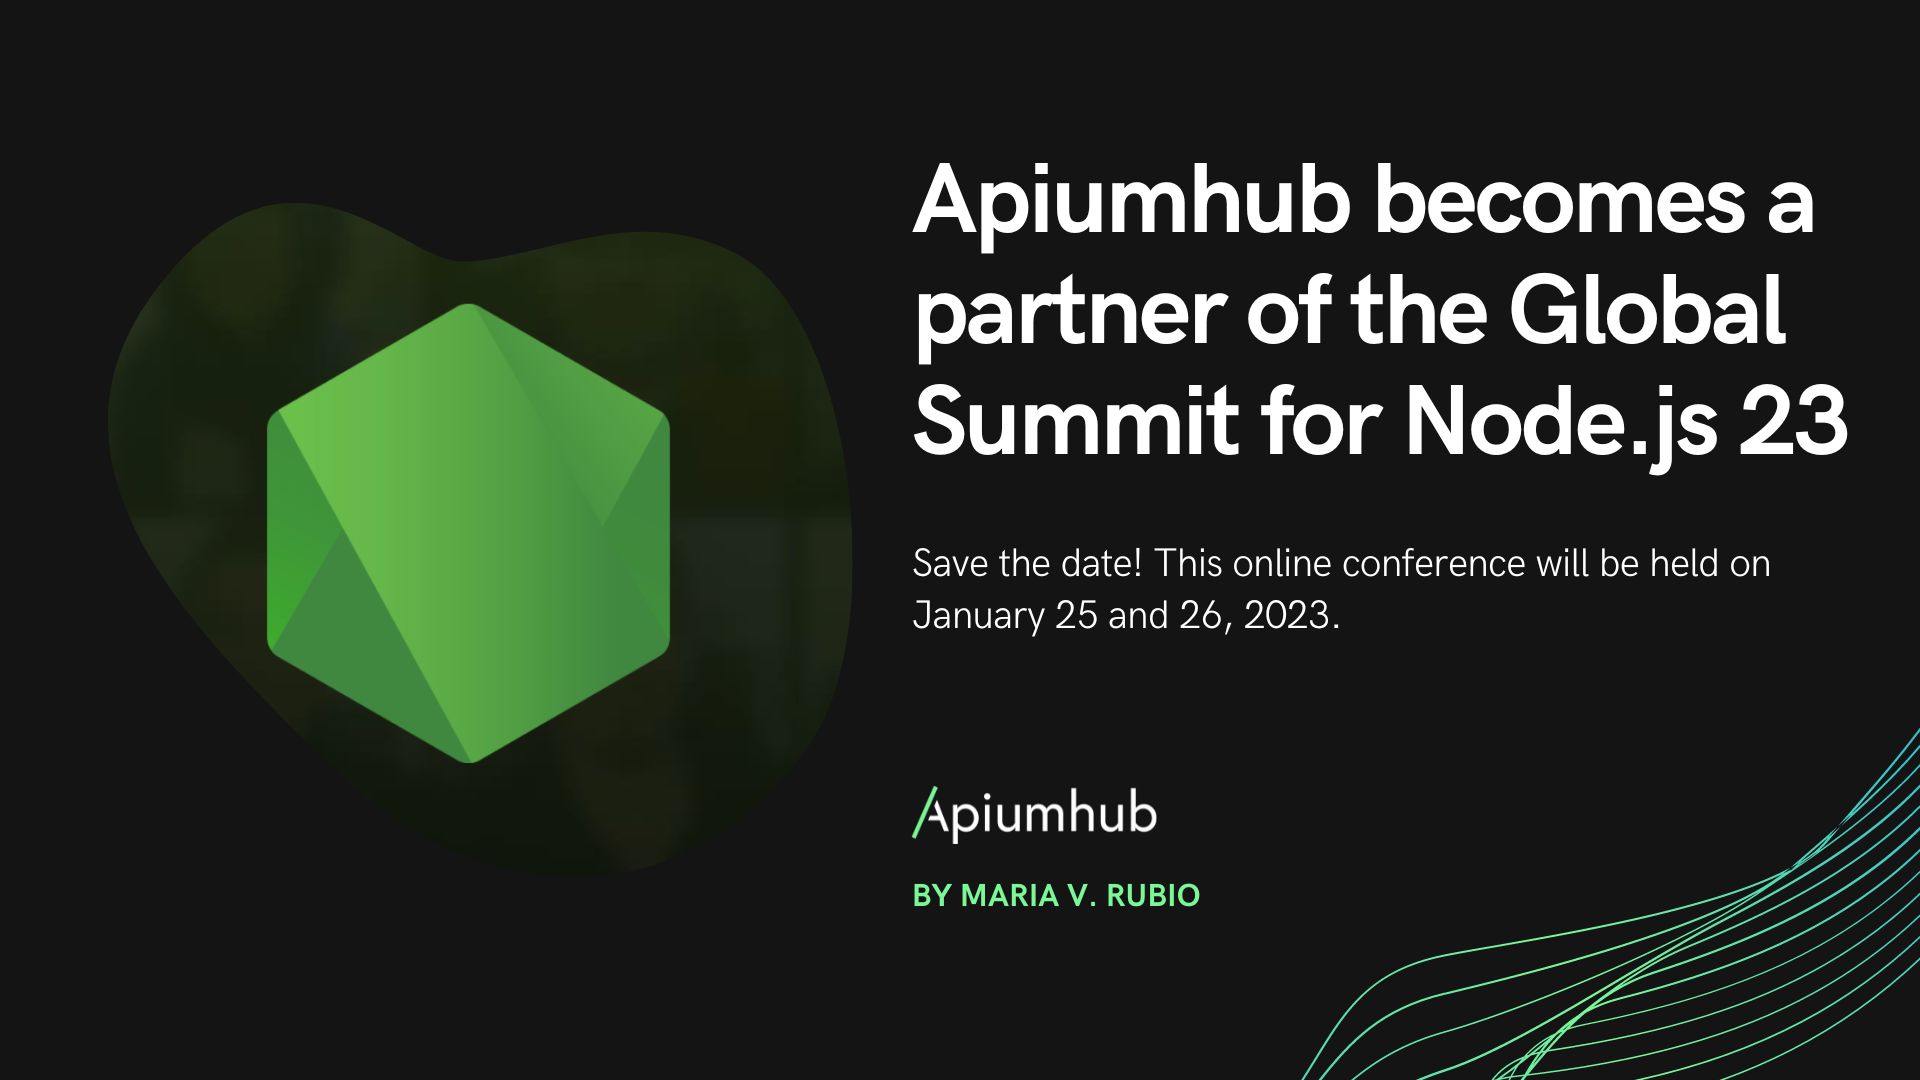 Apiumhub becomes partner of the Global Summit for Node.js